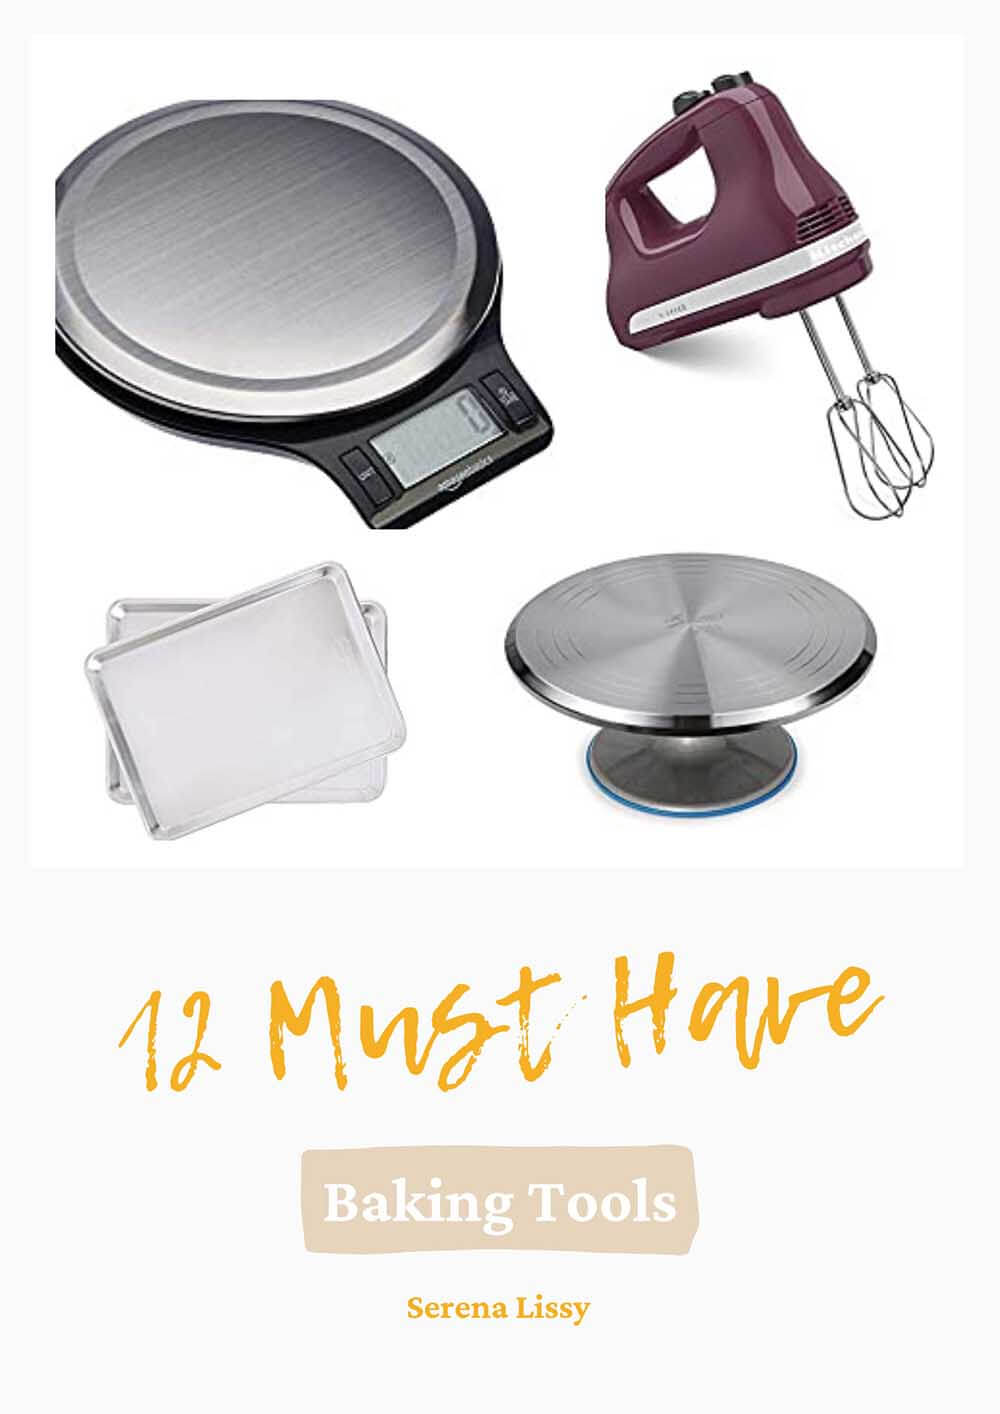 Kitchen tools for baking